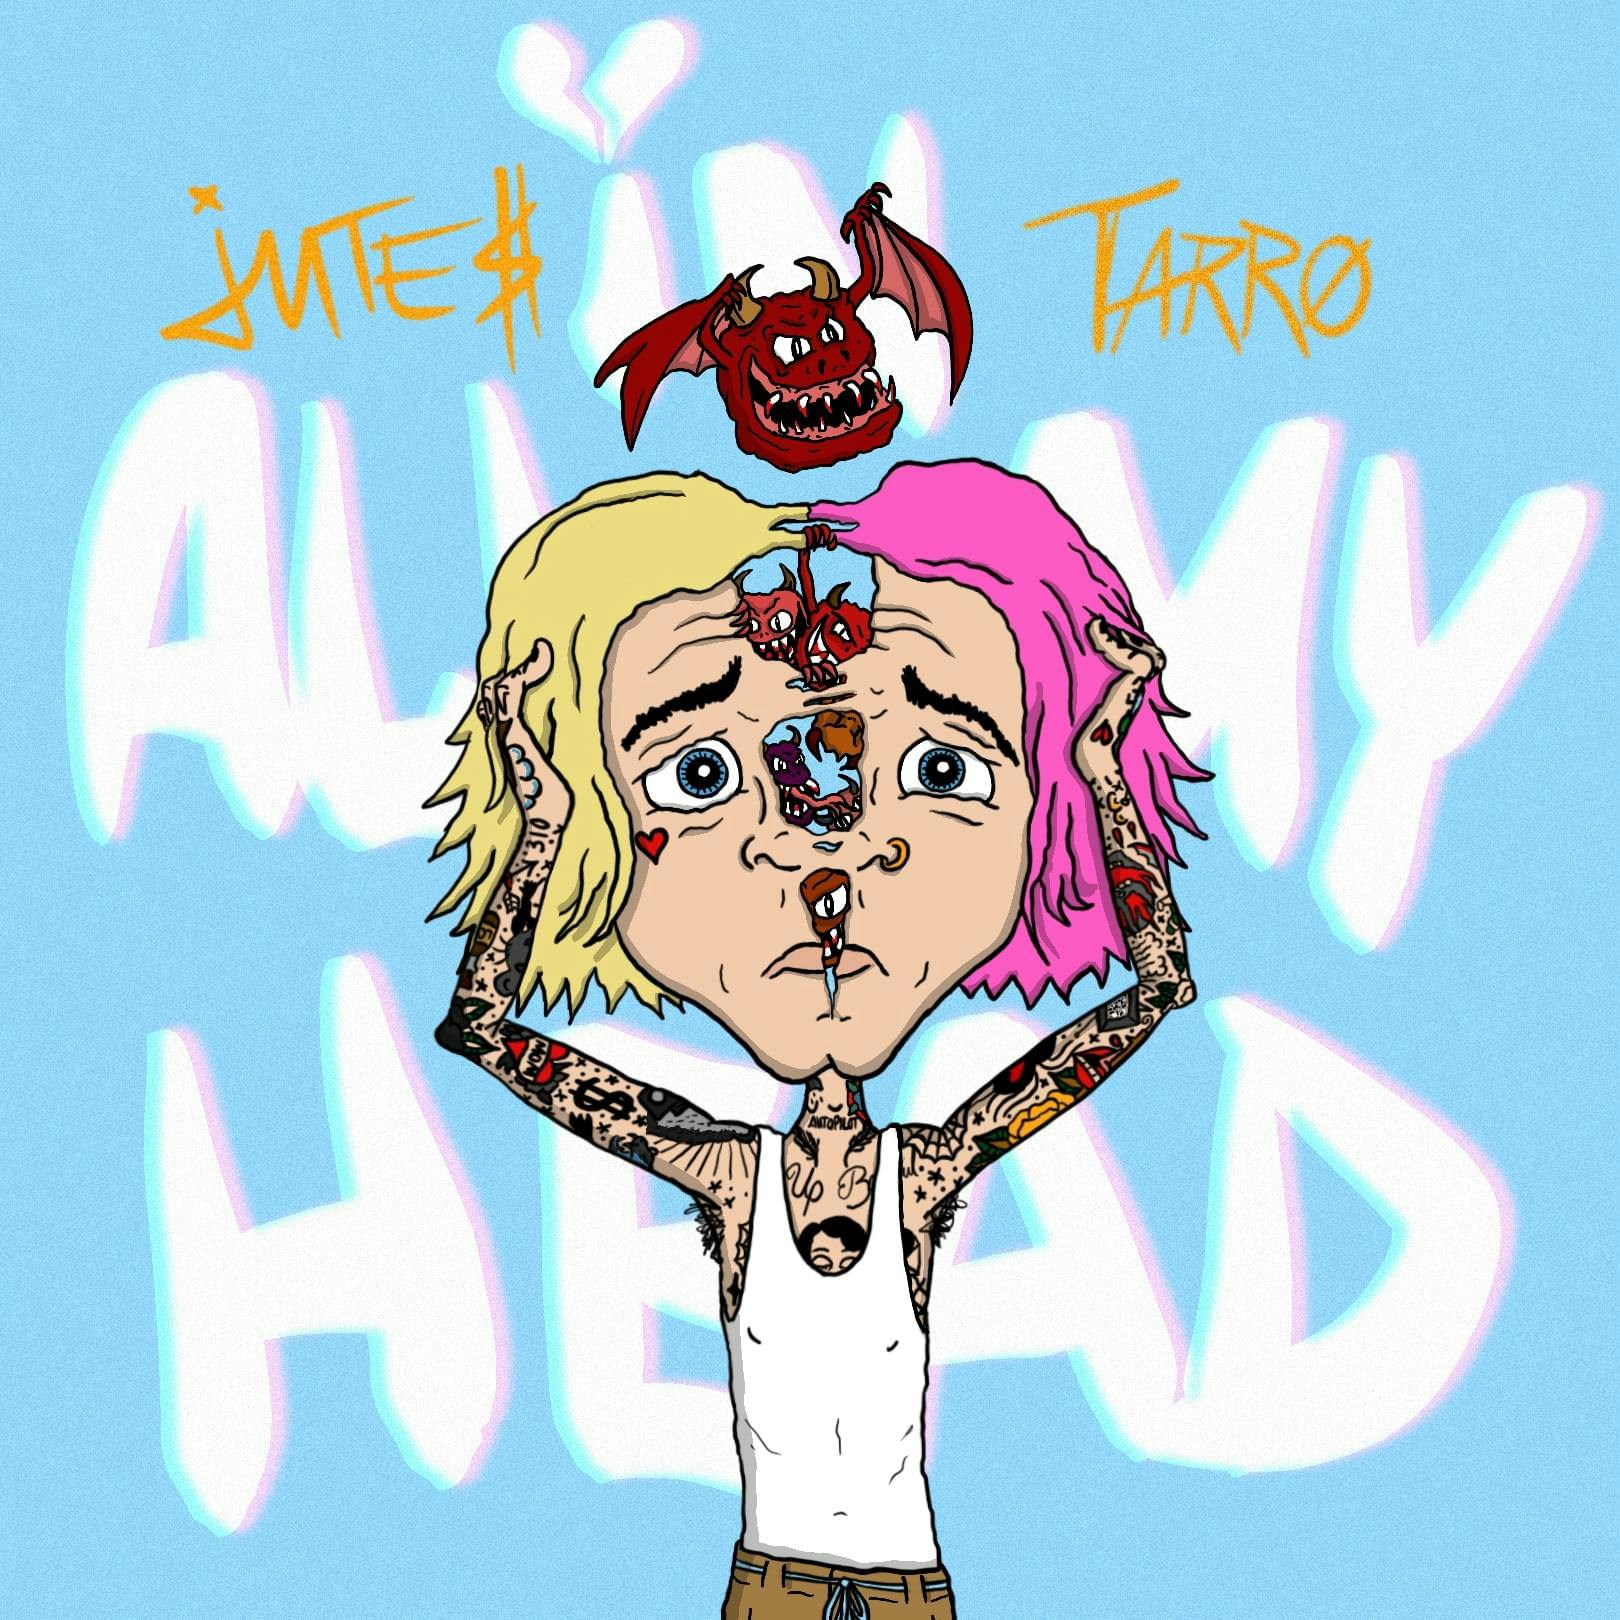 Cover art for jutes's song: jutes x tarro - all in my head